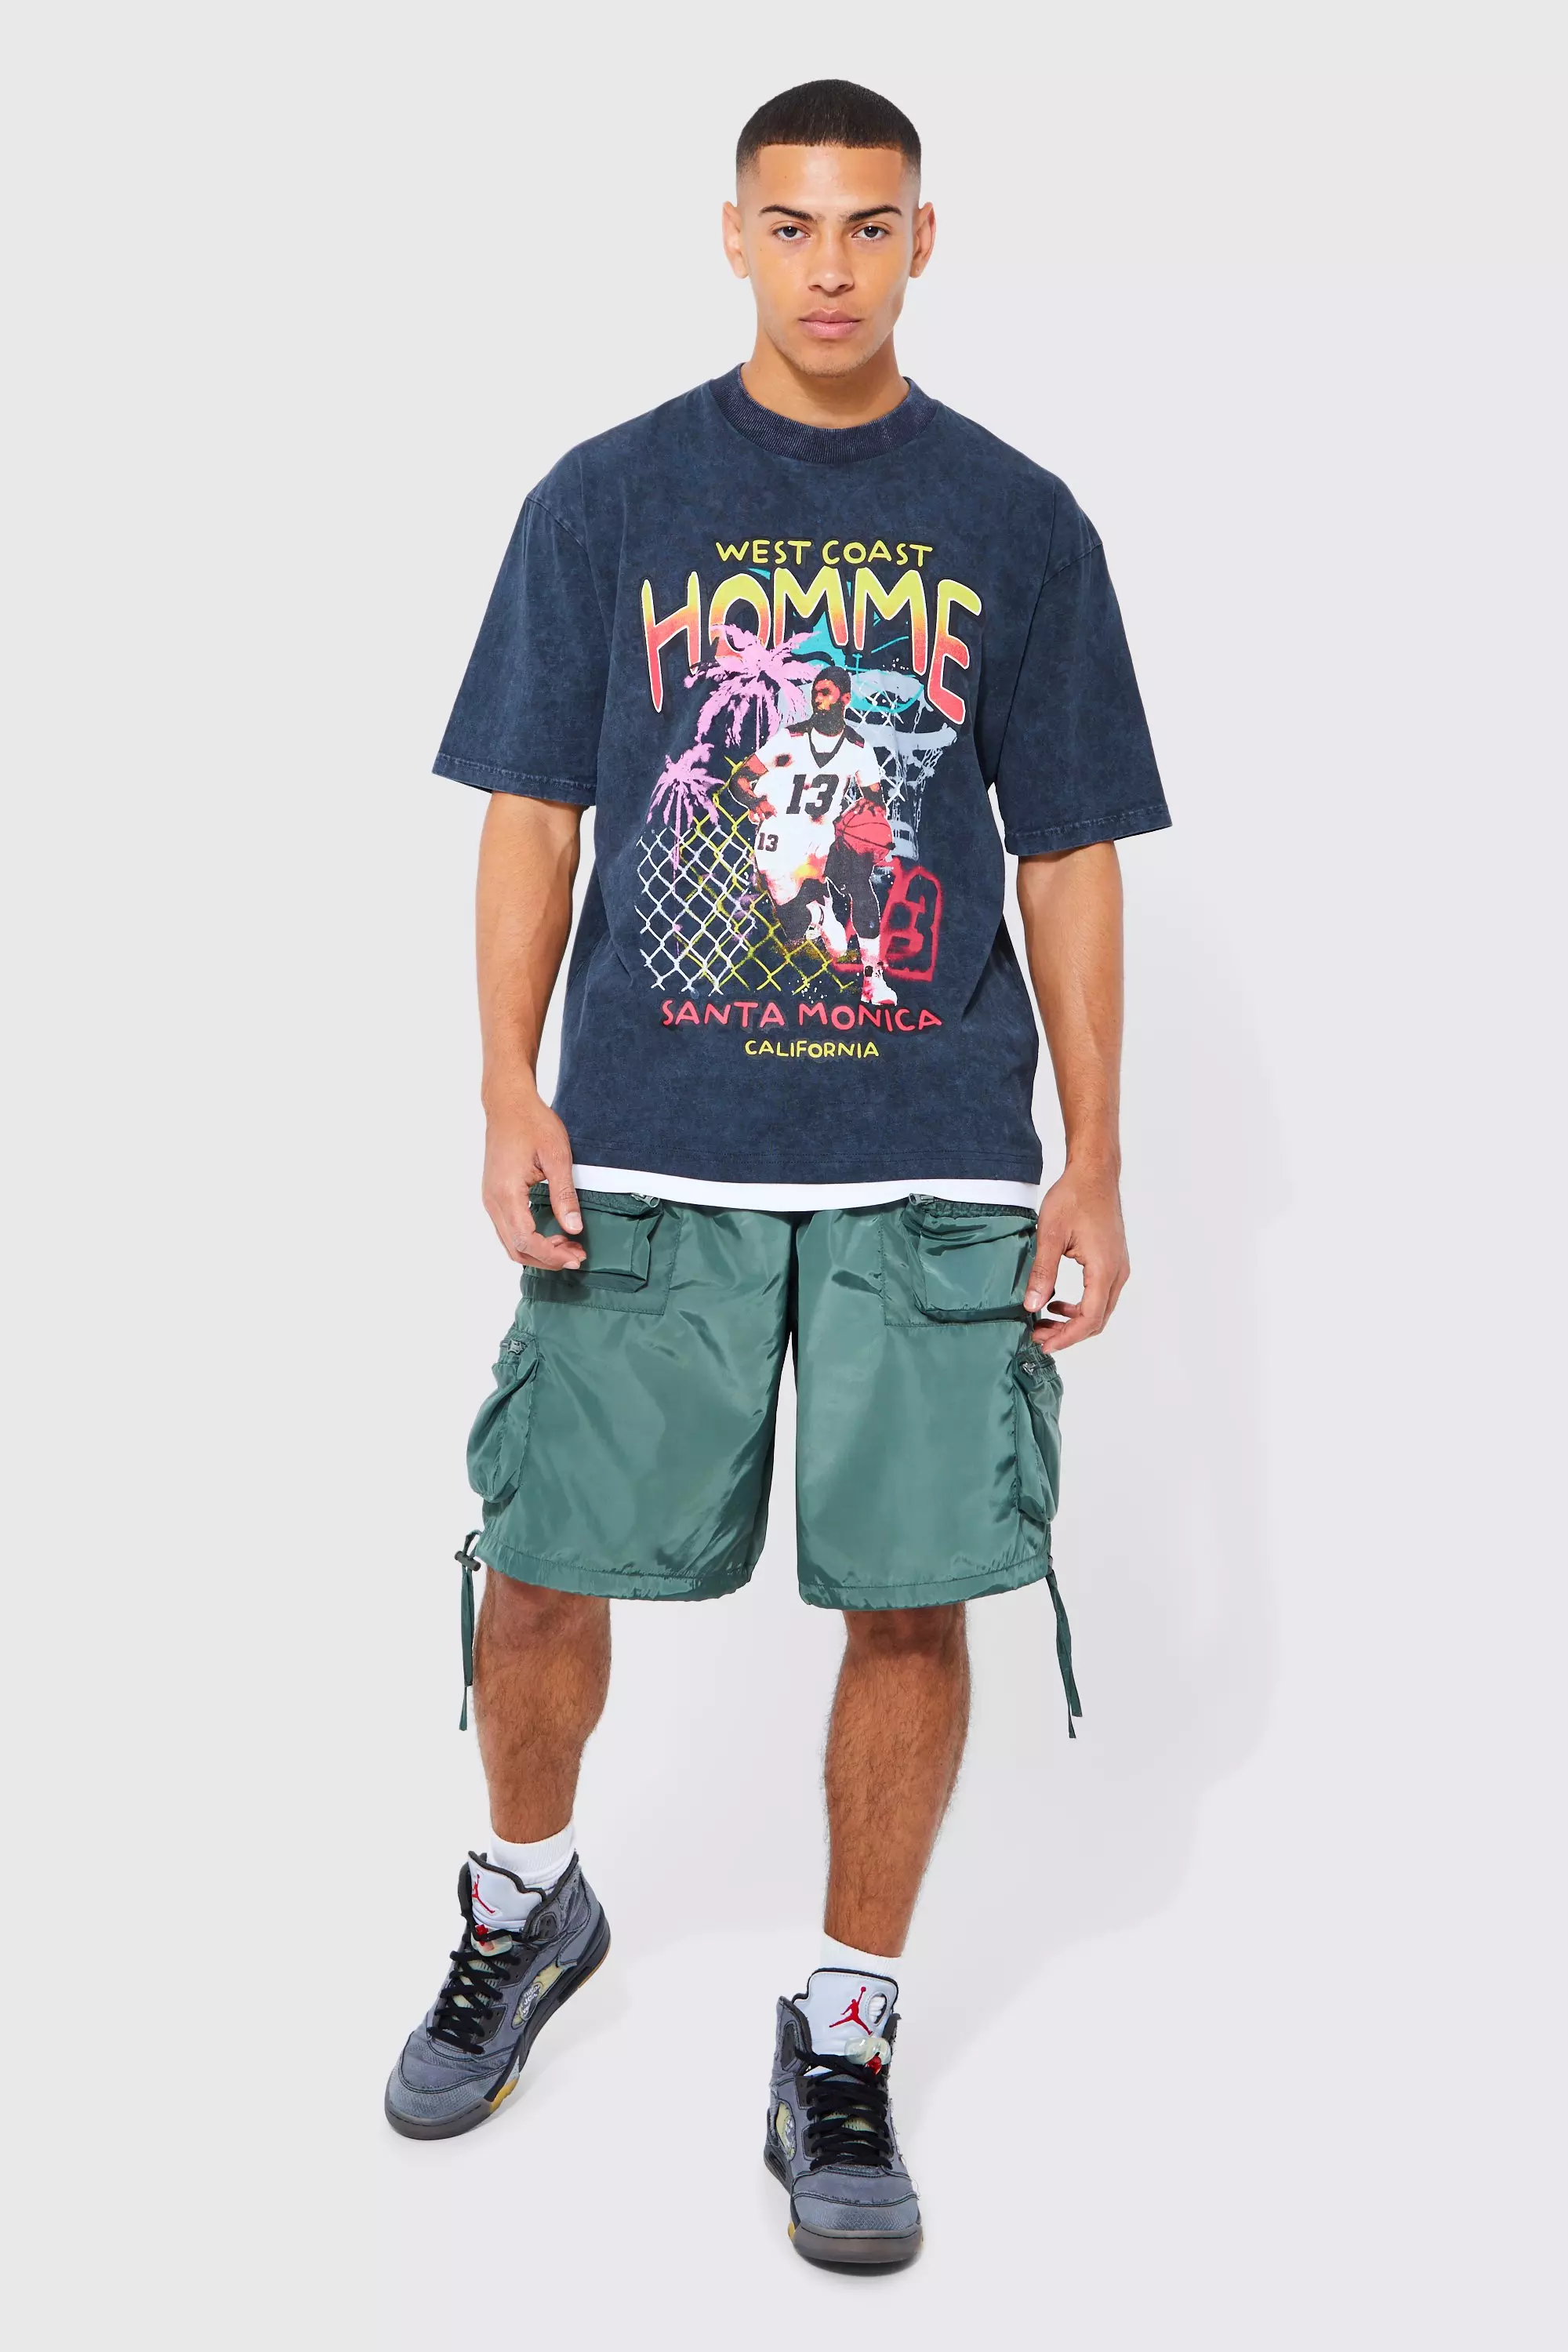 boohooMAN Oversized Pour Homme Graphic T-Shirt - Green - Size XS